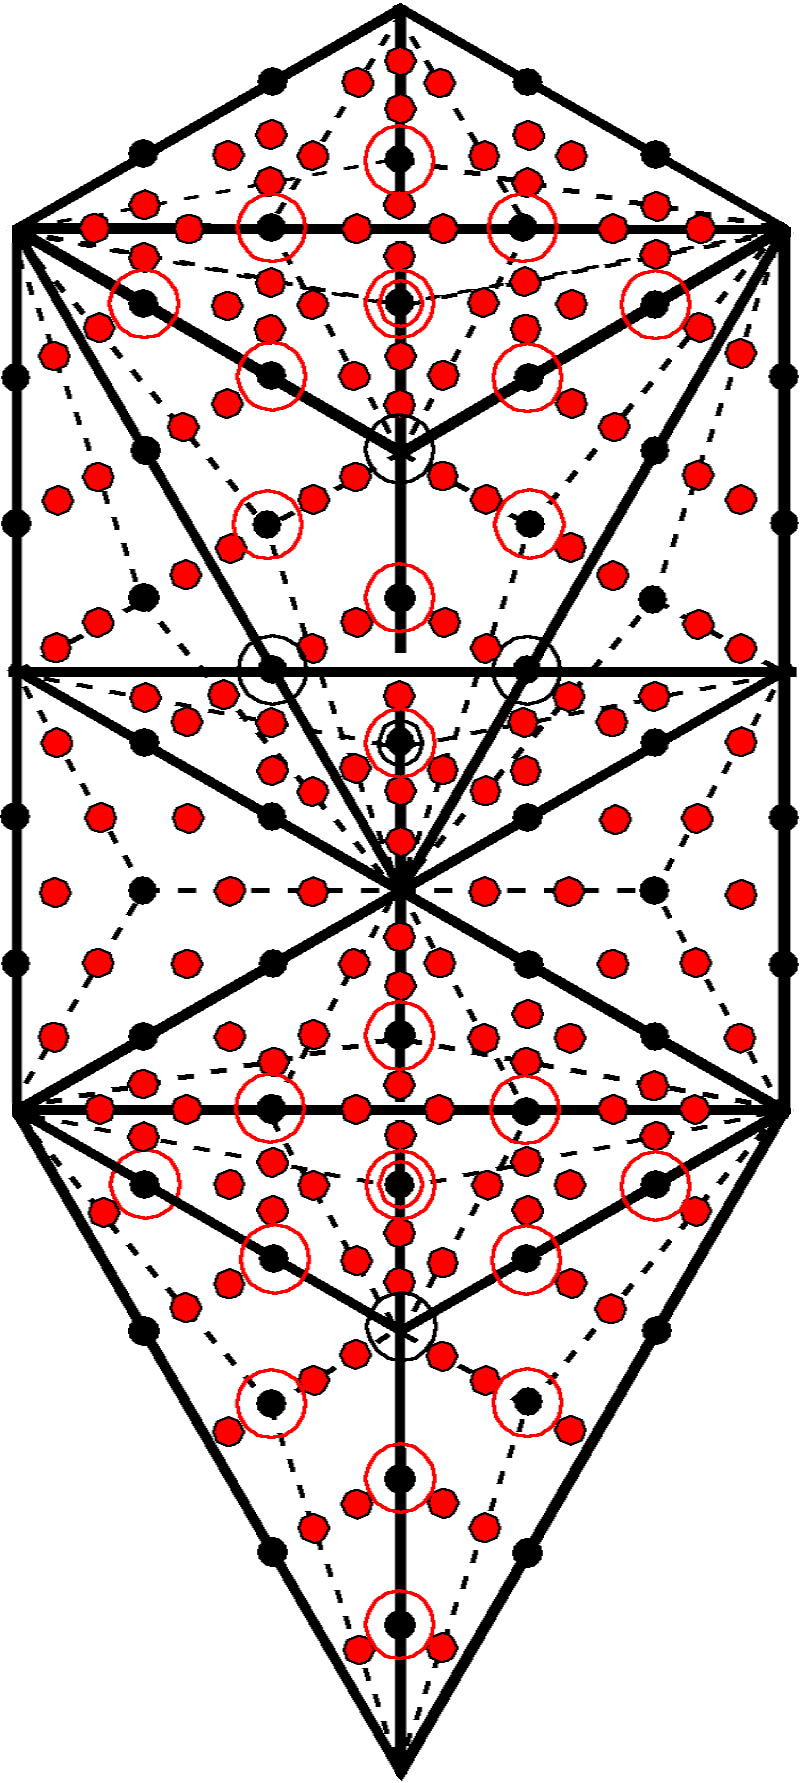 69-171 division of yods in 1-tree with Type A triangles